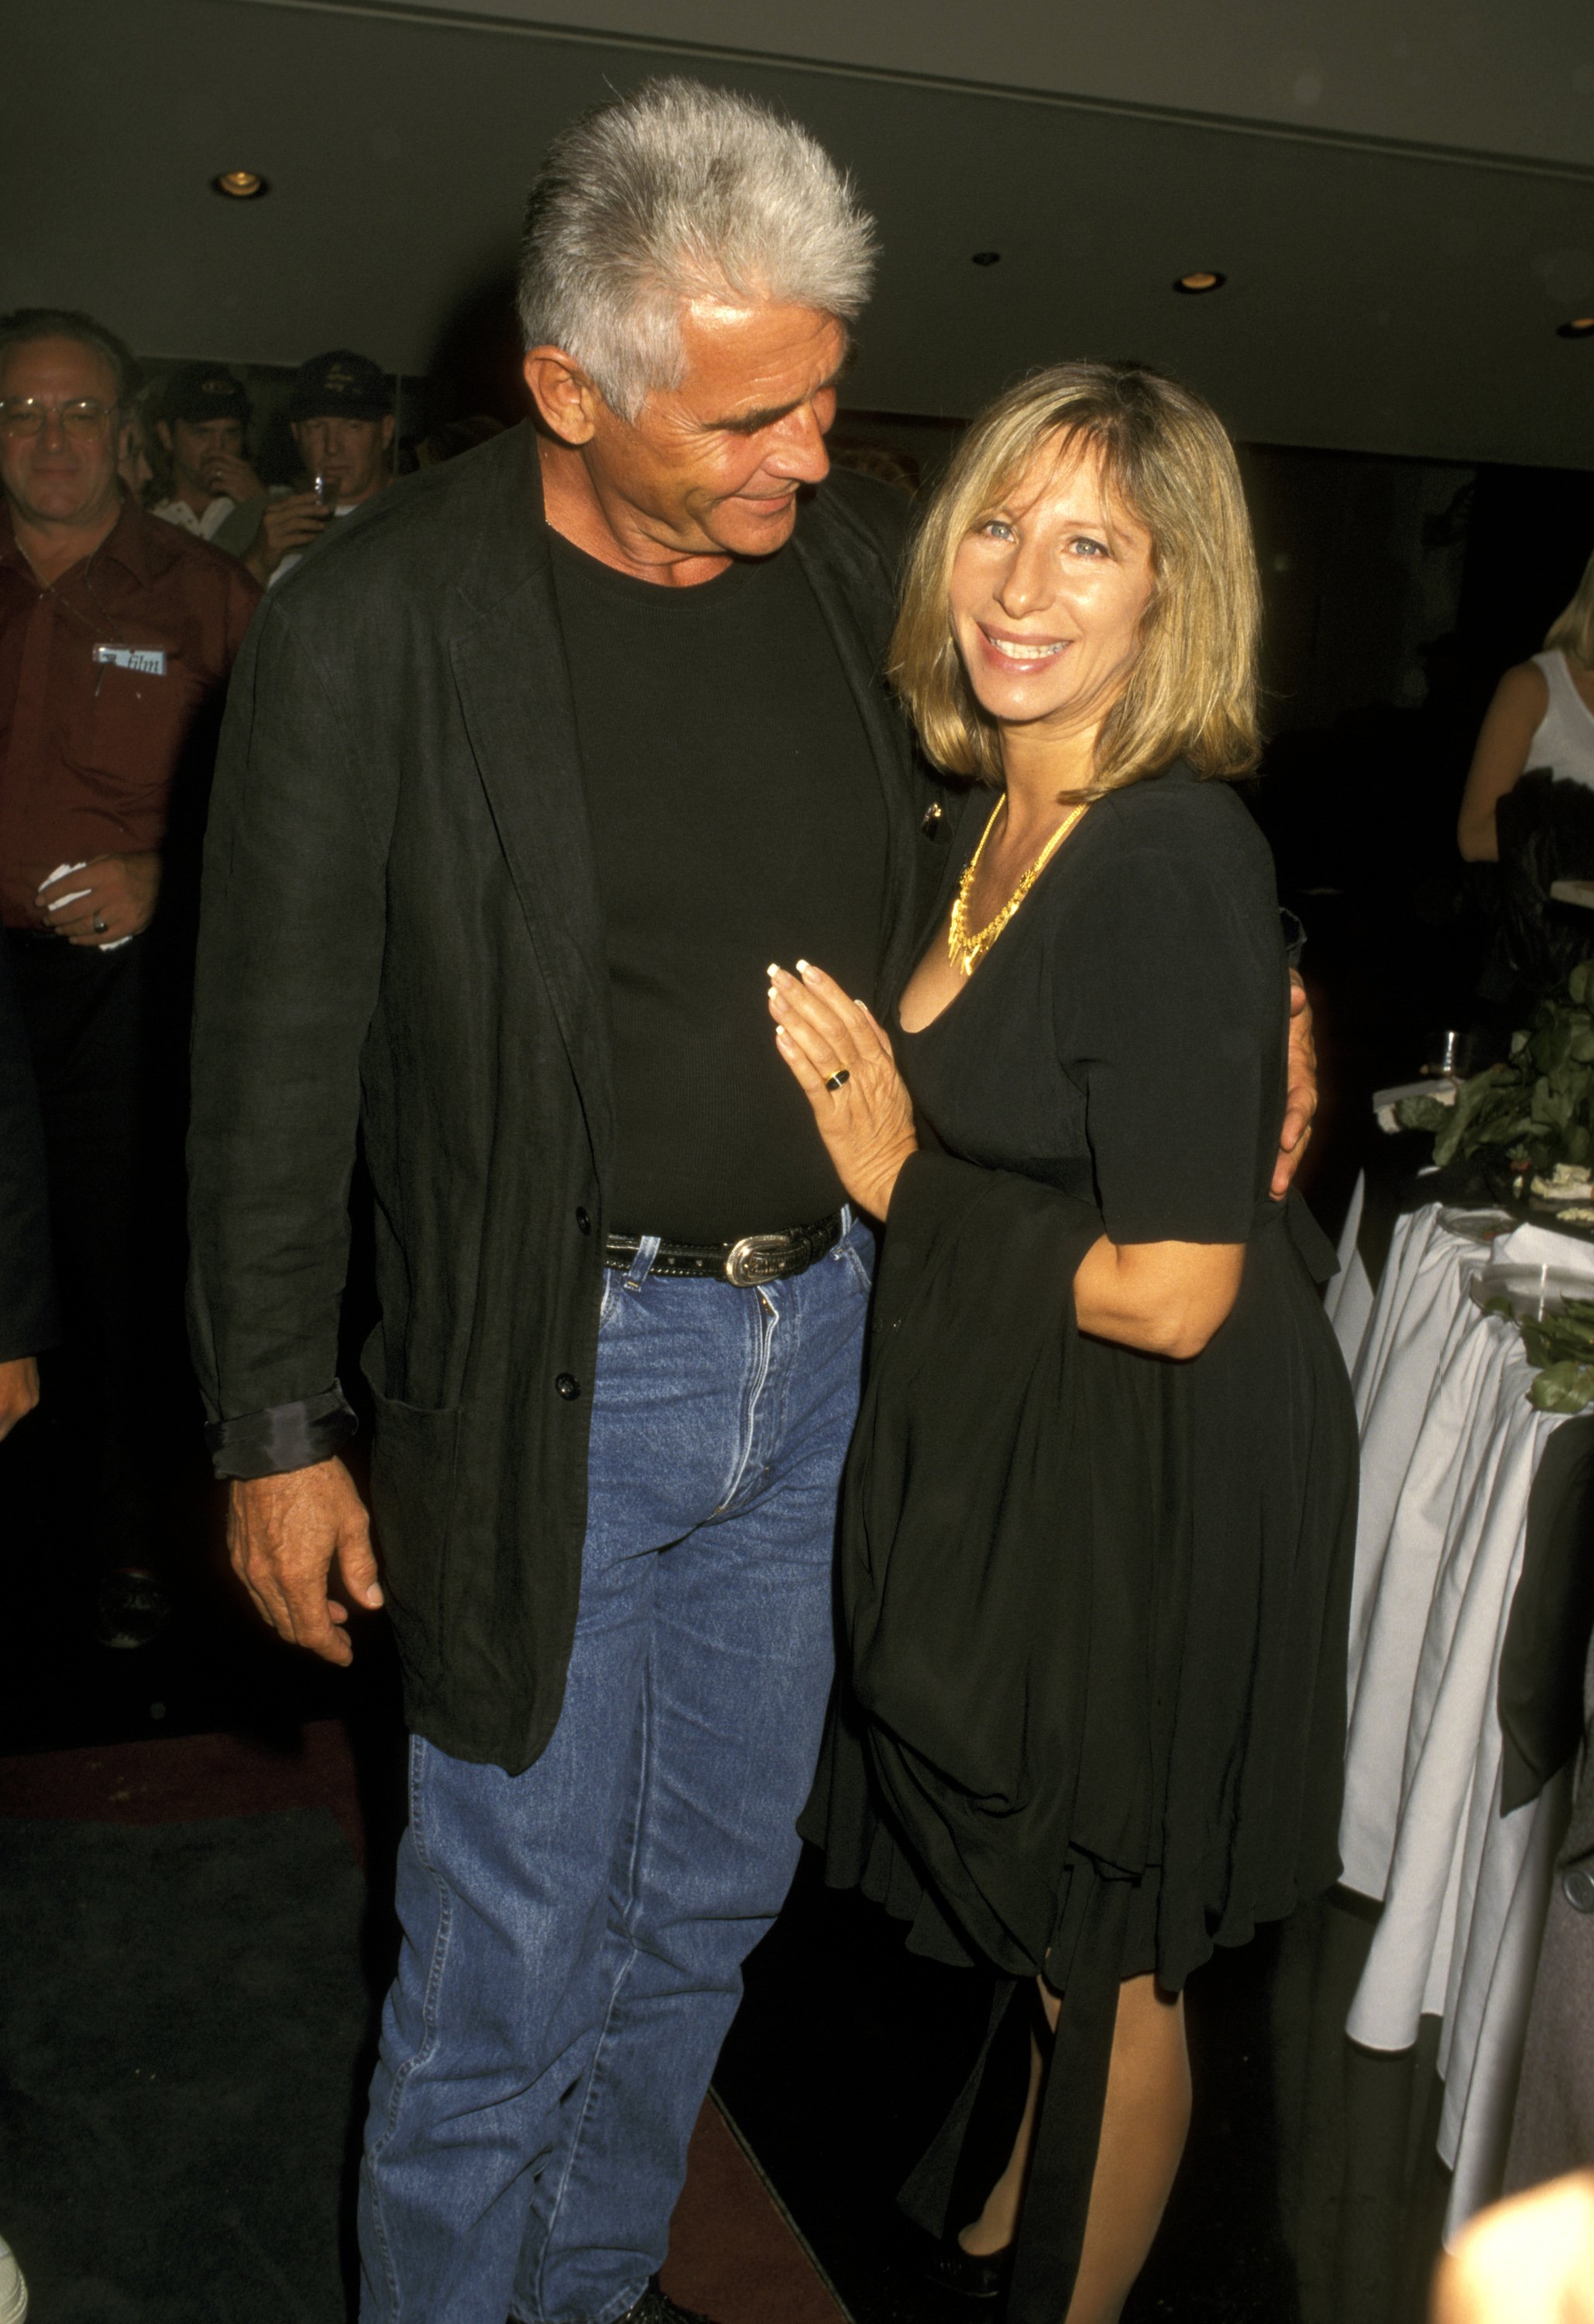 James Brolin and Barbra Streisand during the screening of "My Brother's War" in Los Angeles on October 17, 1997 | Source: Getty Images